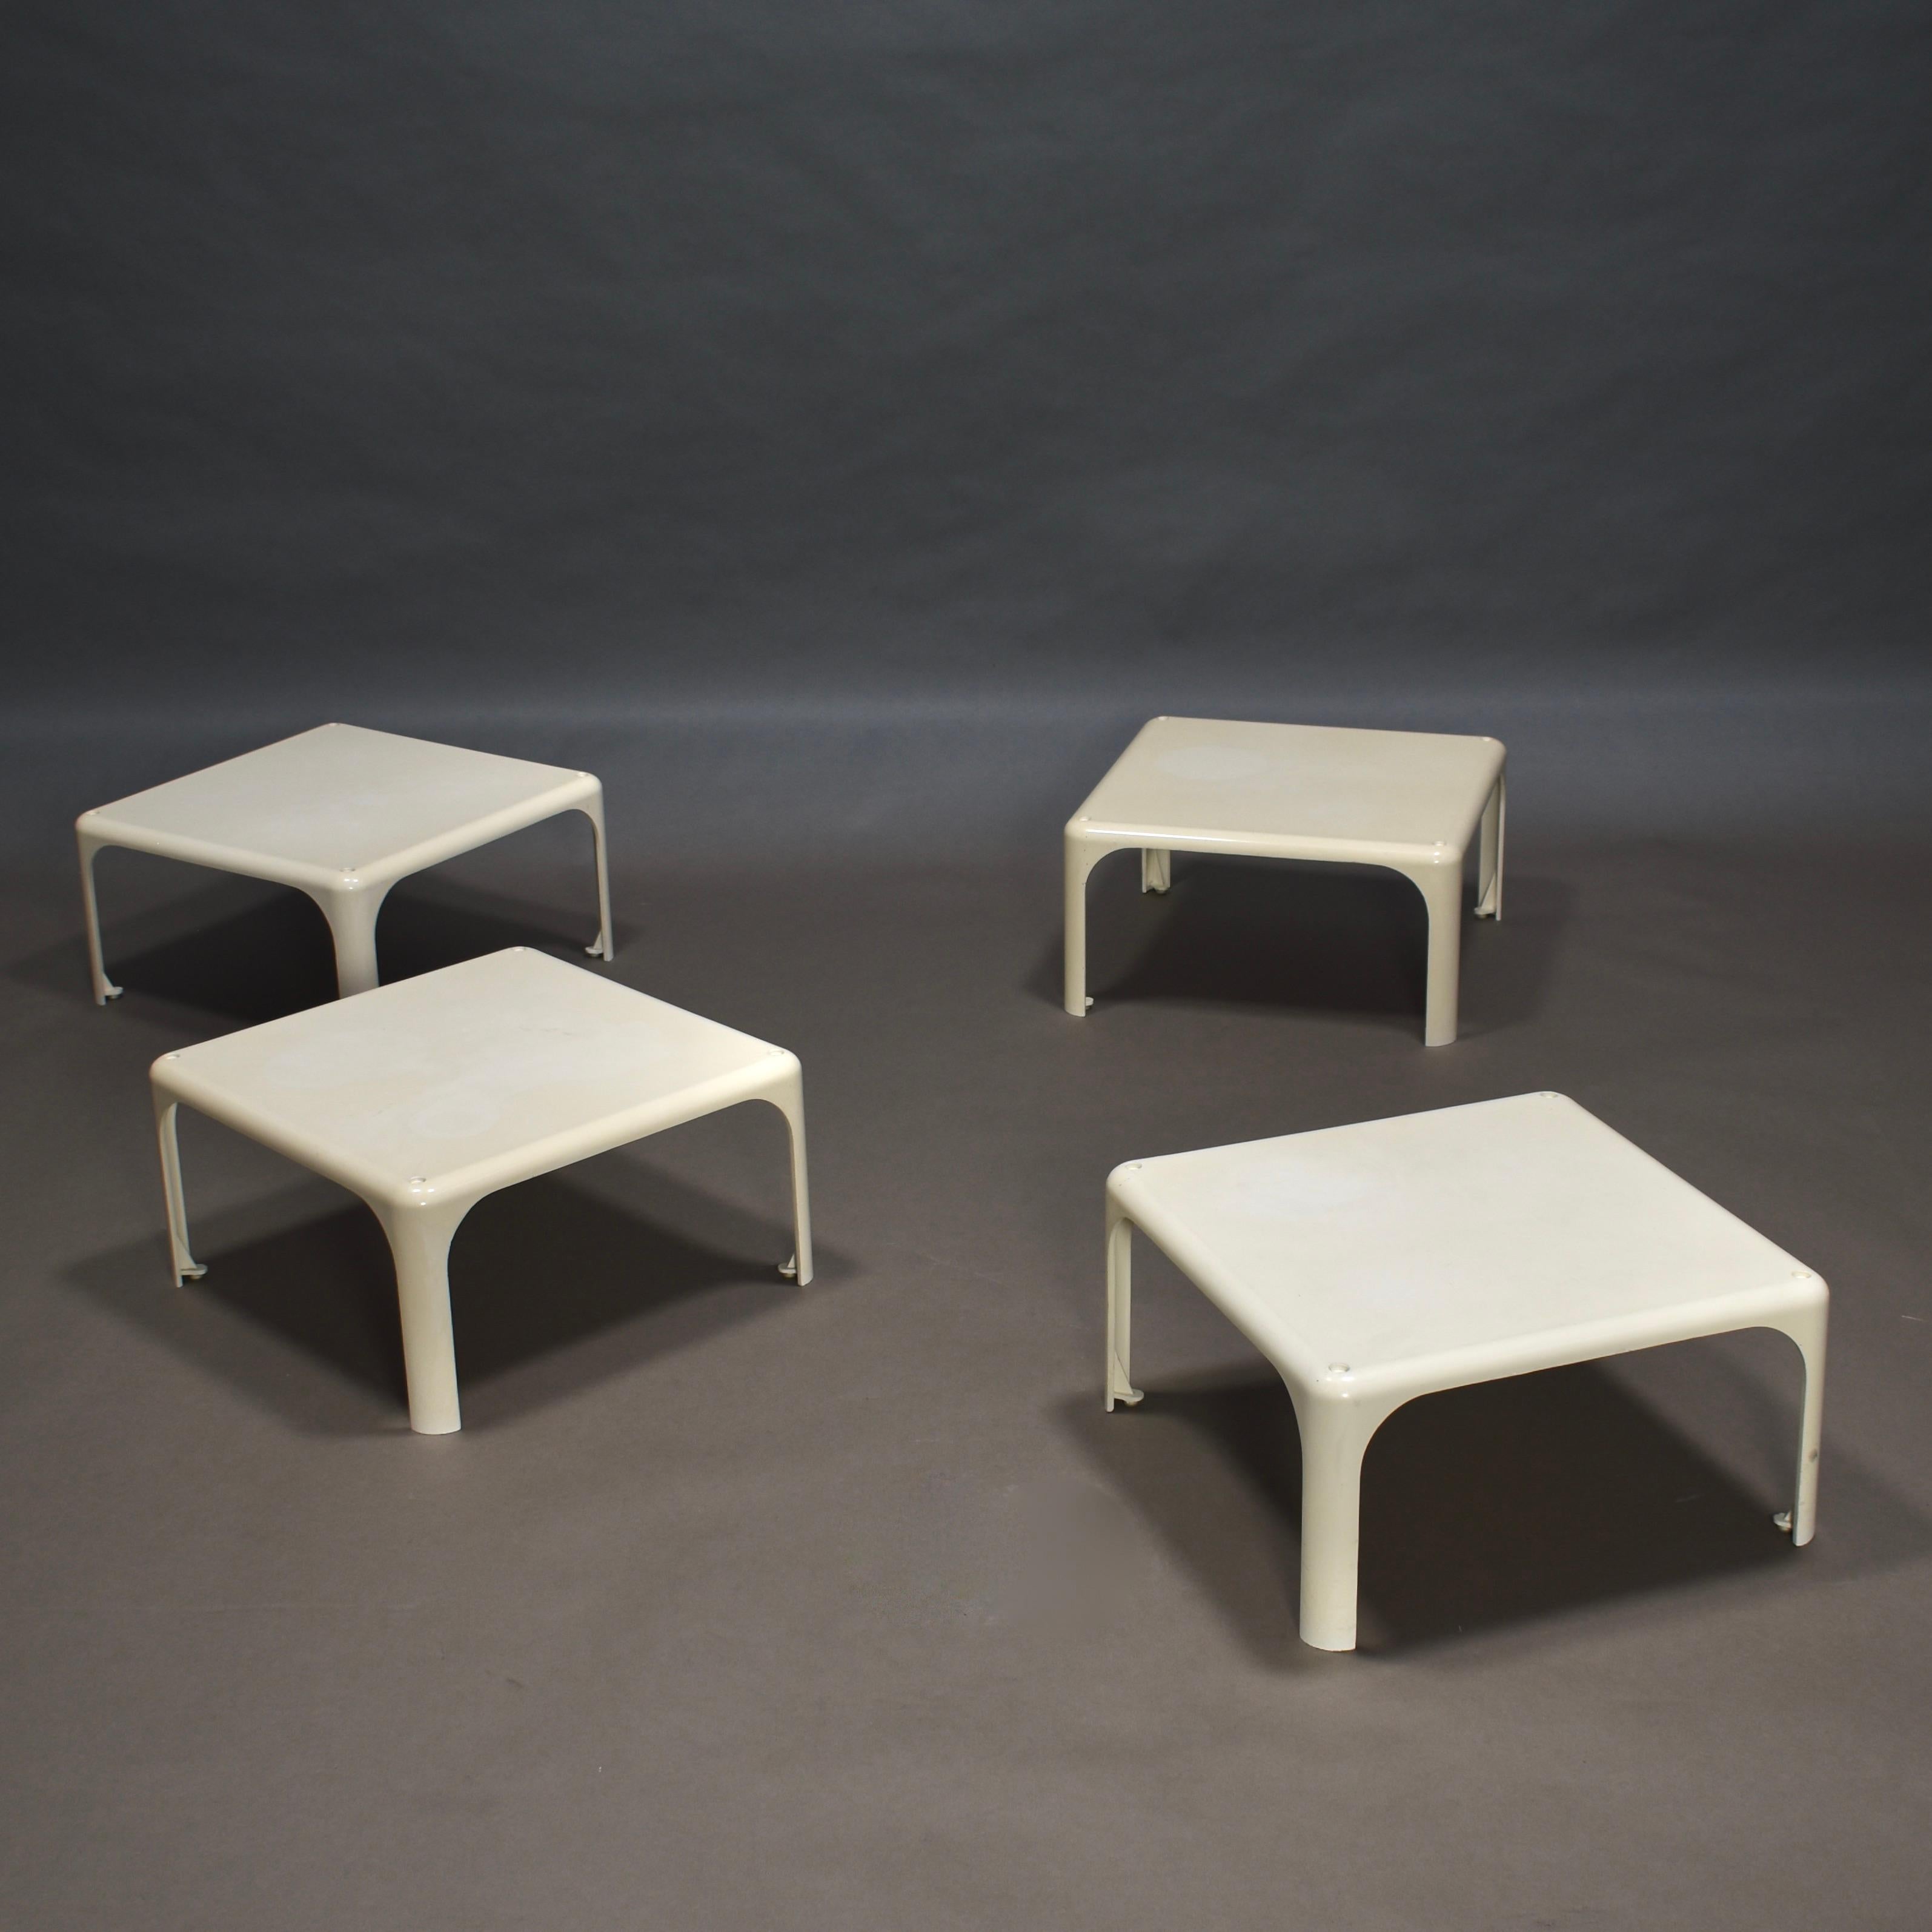 Mid-Century Modern Vico Magistretti 'Demetrio' Stackable Side Tables for Artemide, Italy, 1964